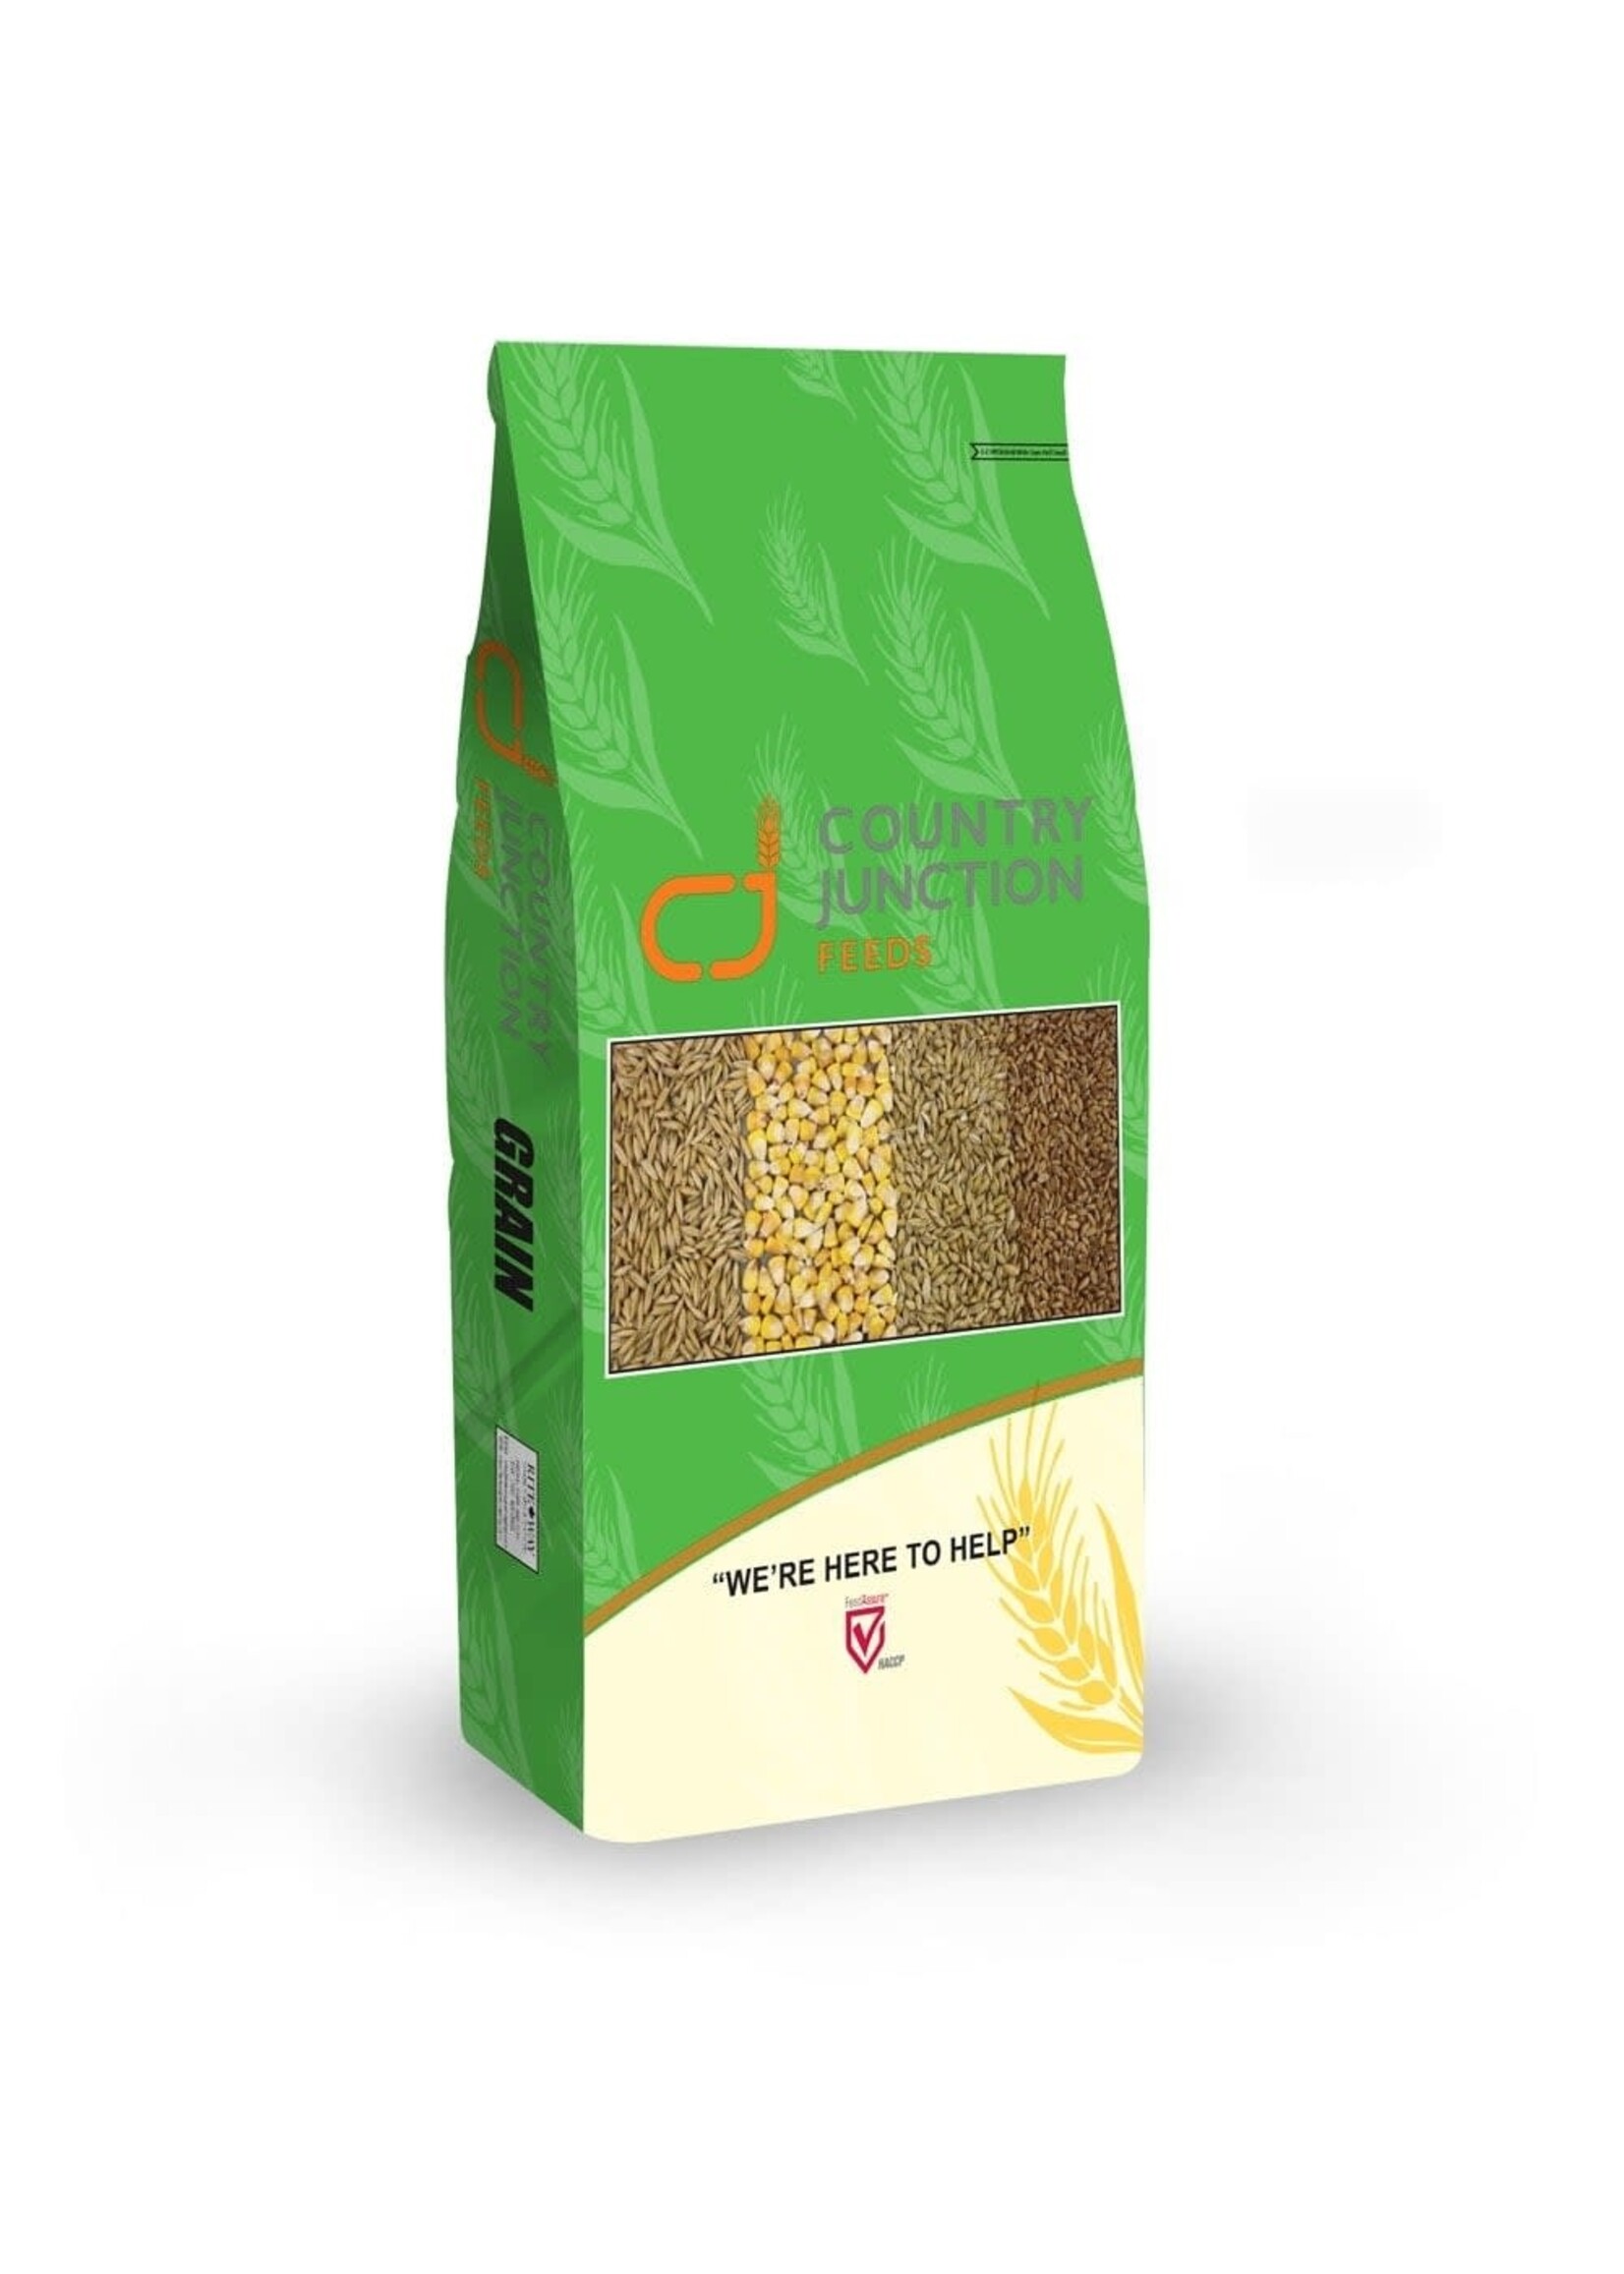 Country Junction CJ - COB - Corn/Oat/Barley With Canola Oil - 20 kg